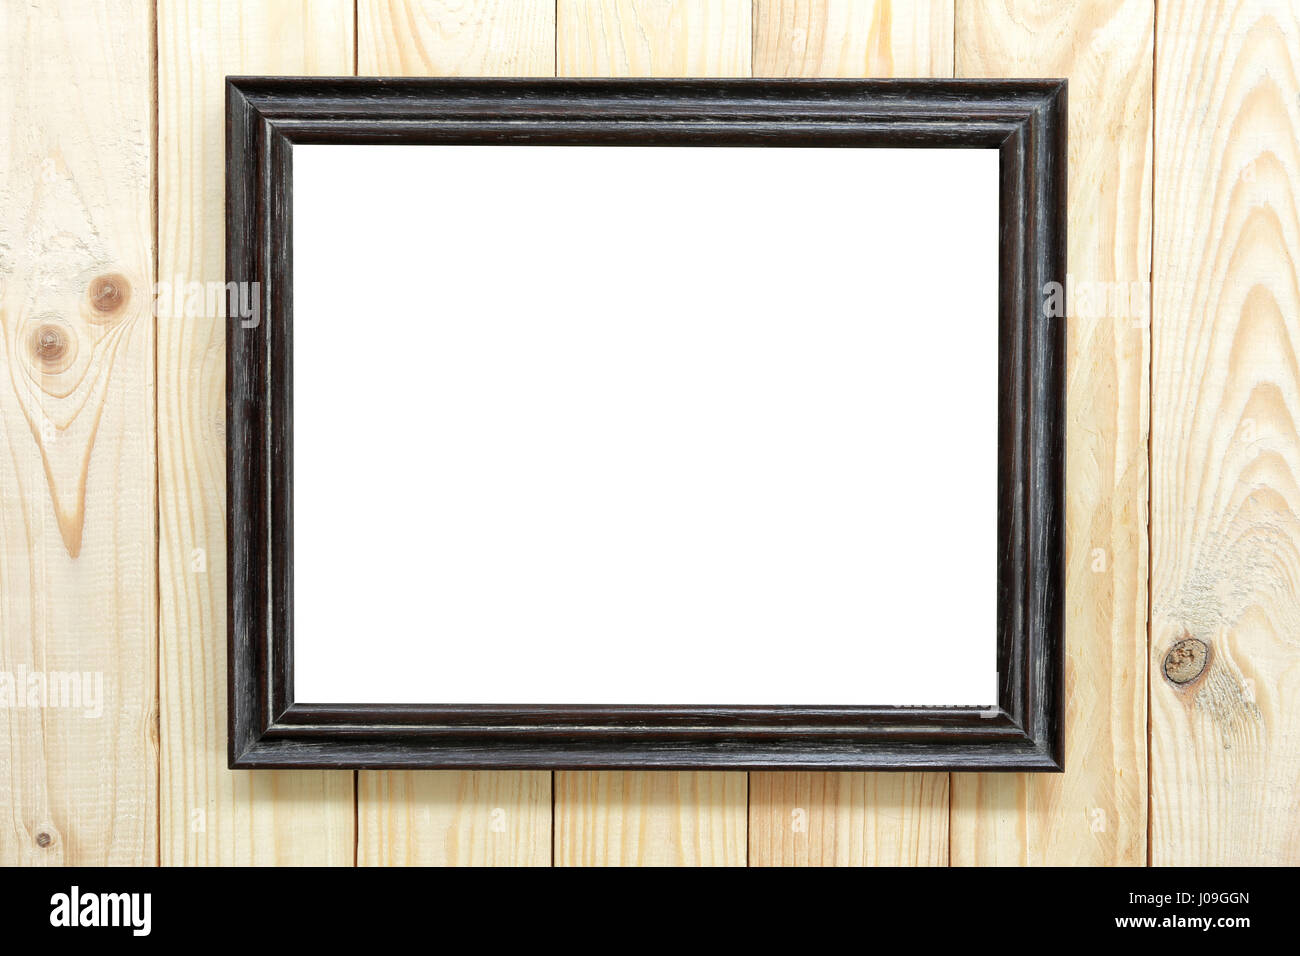 Black wood frame on wooden floor and have square of copy space. Stock Photo